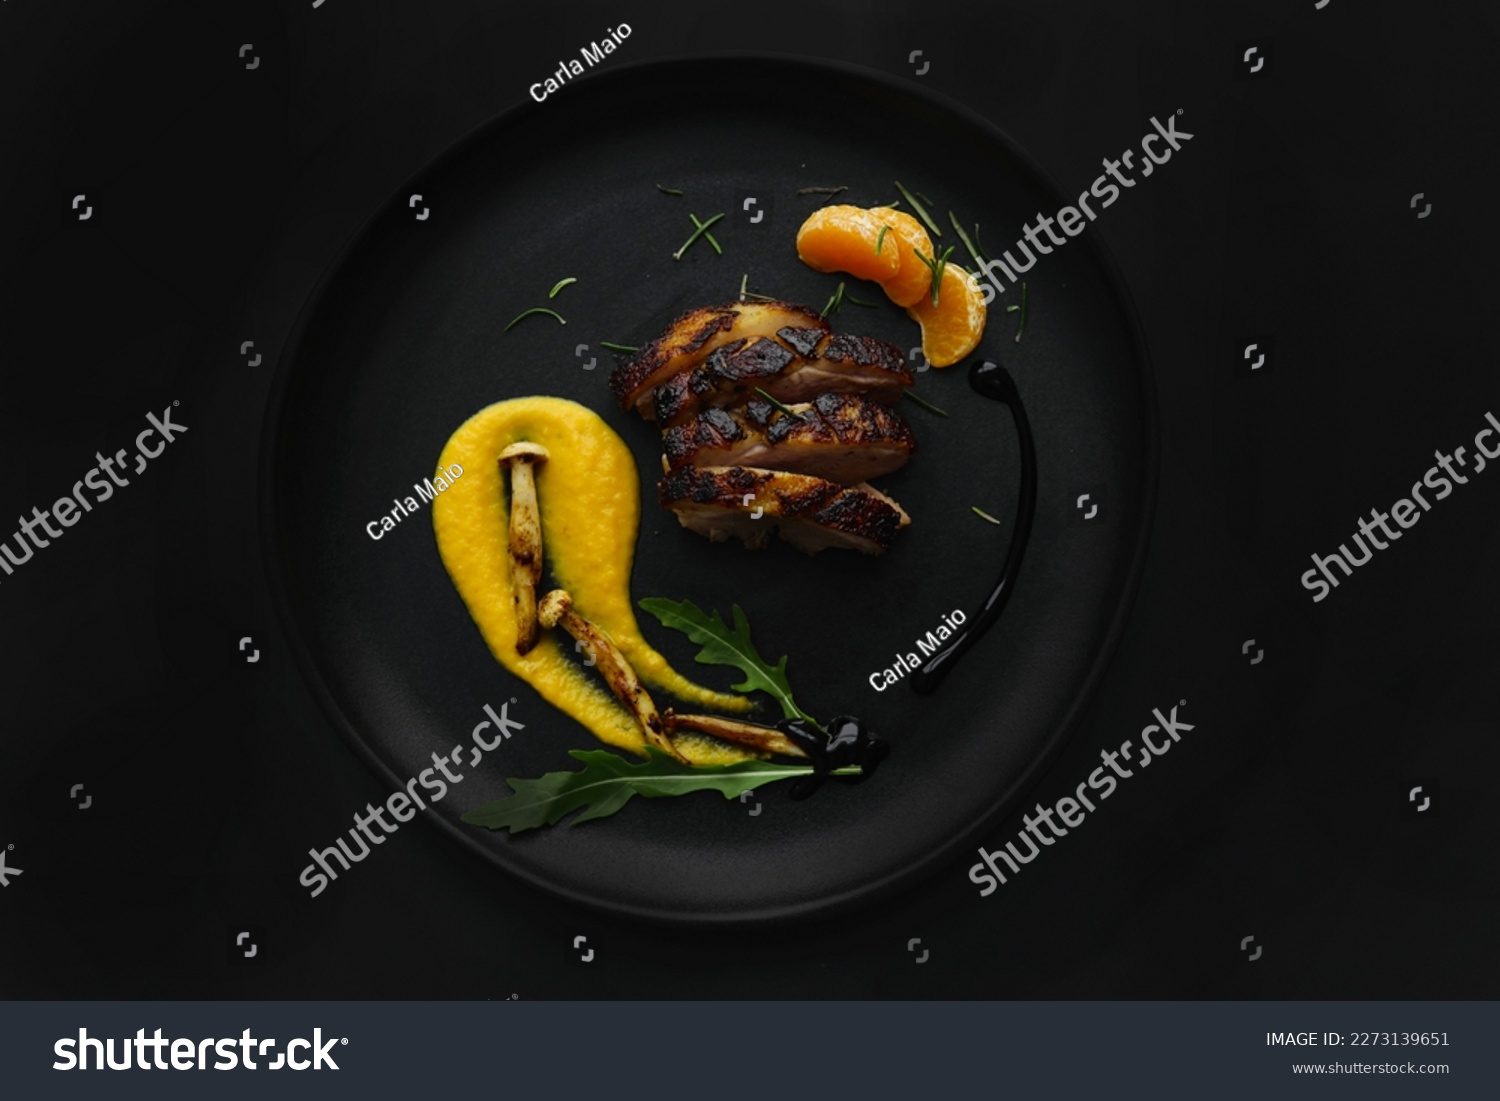 Dark photo of a fine dining dish with duck breast and roasted squash purée, mushrooms and greens. Black background with studio professional lighting in a top view, flat lay. Stylish gourmet plating. #2273139651